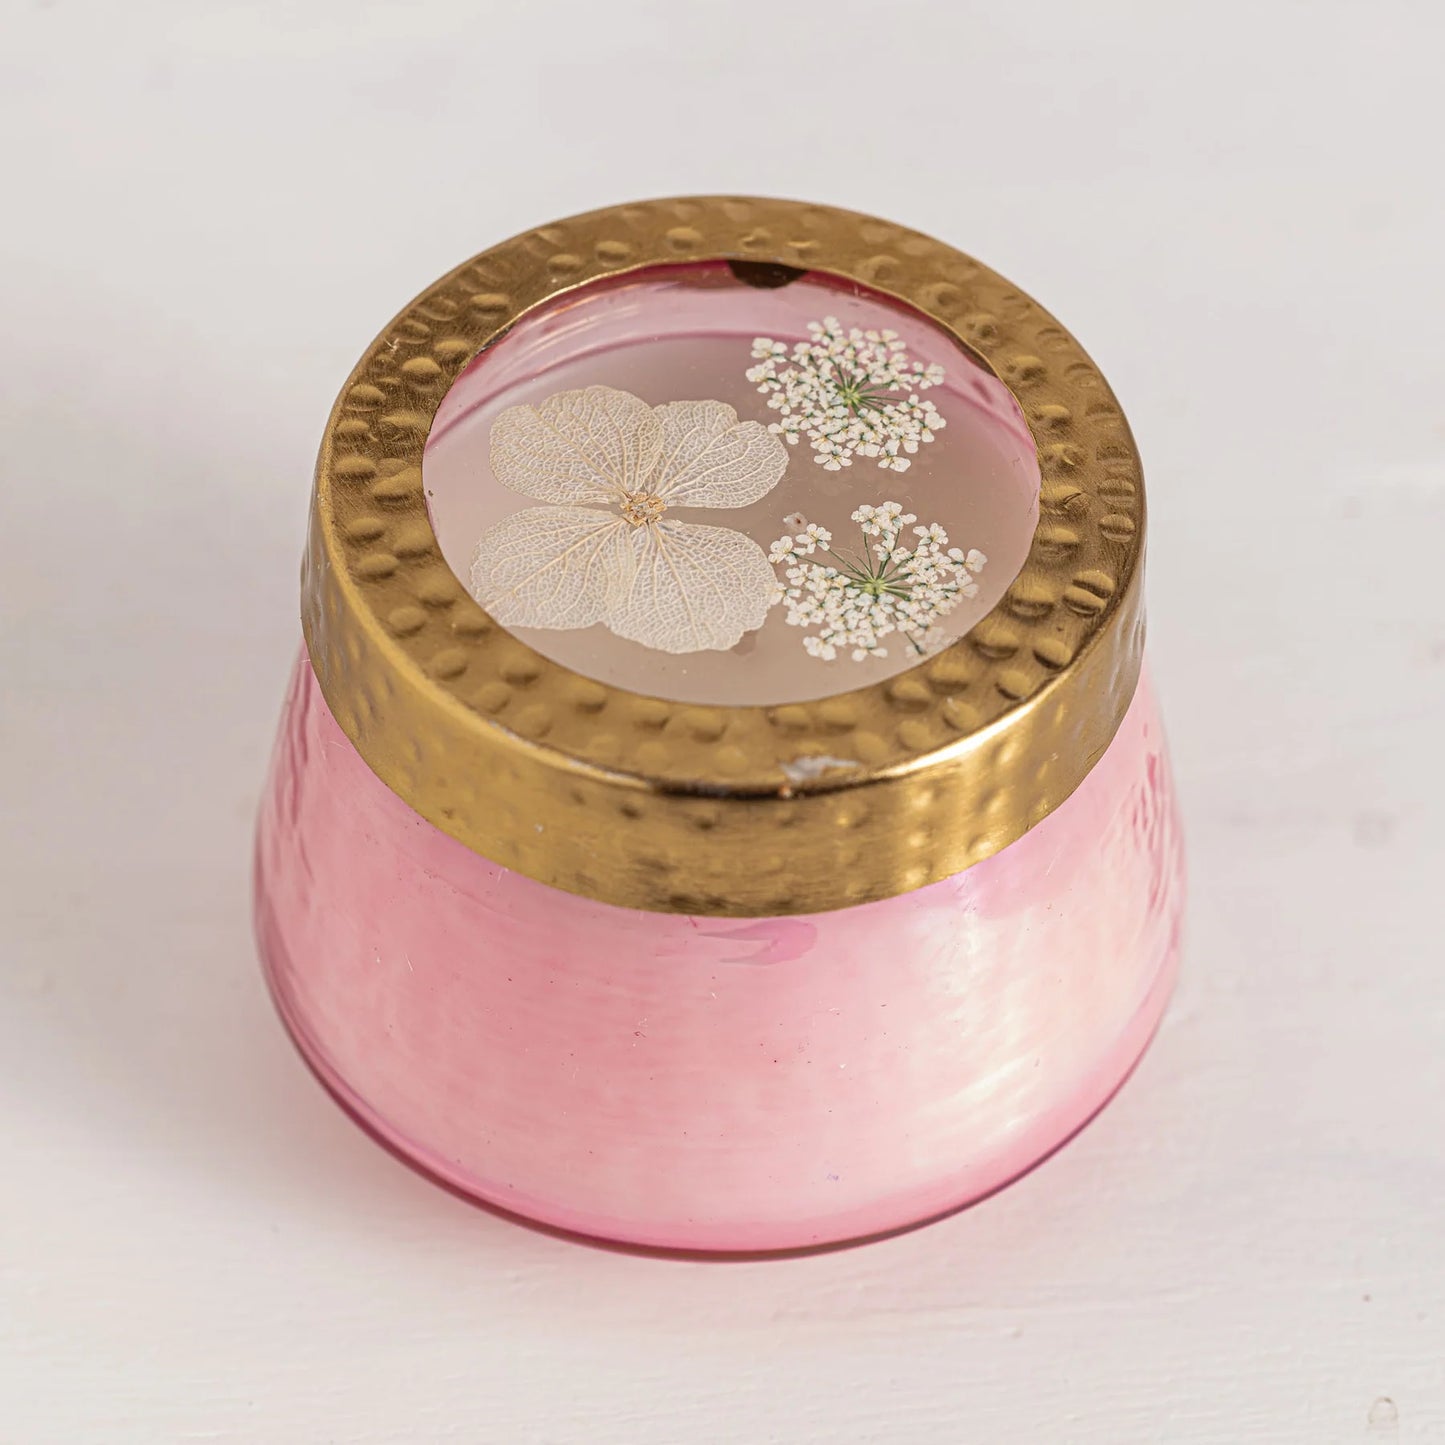 Rosy Rings, Small Luna Flower Watercolor Pressed Floral Candle 4.5 oz - Boutique Dandelion